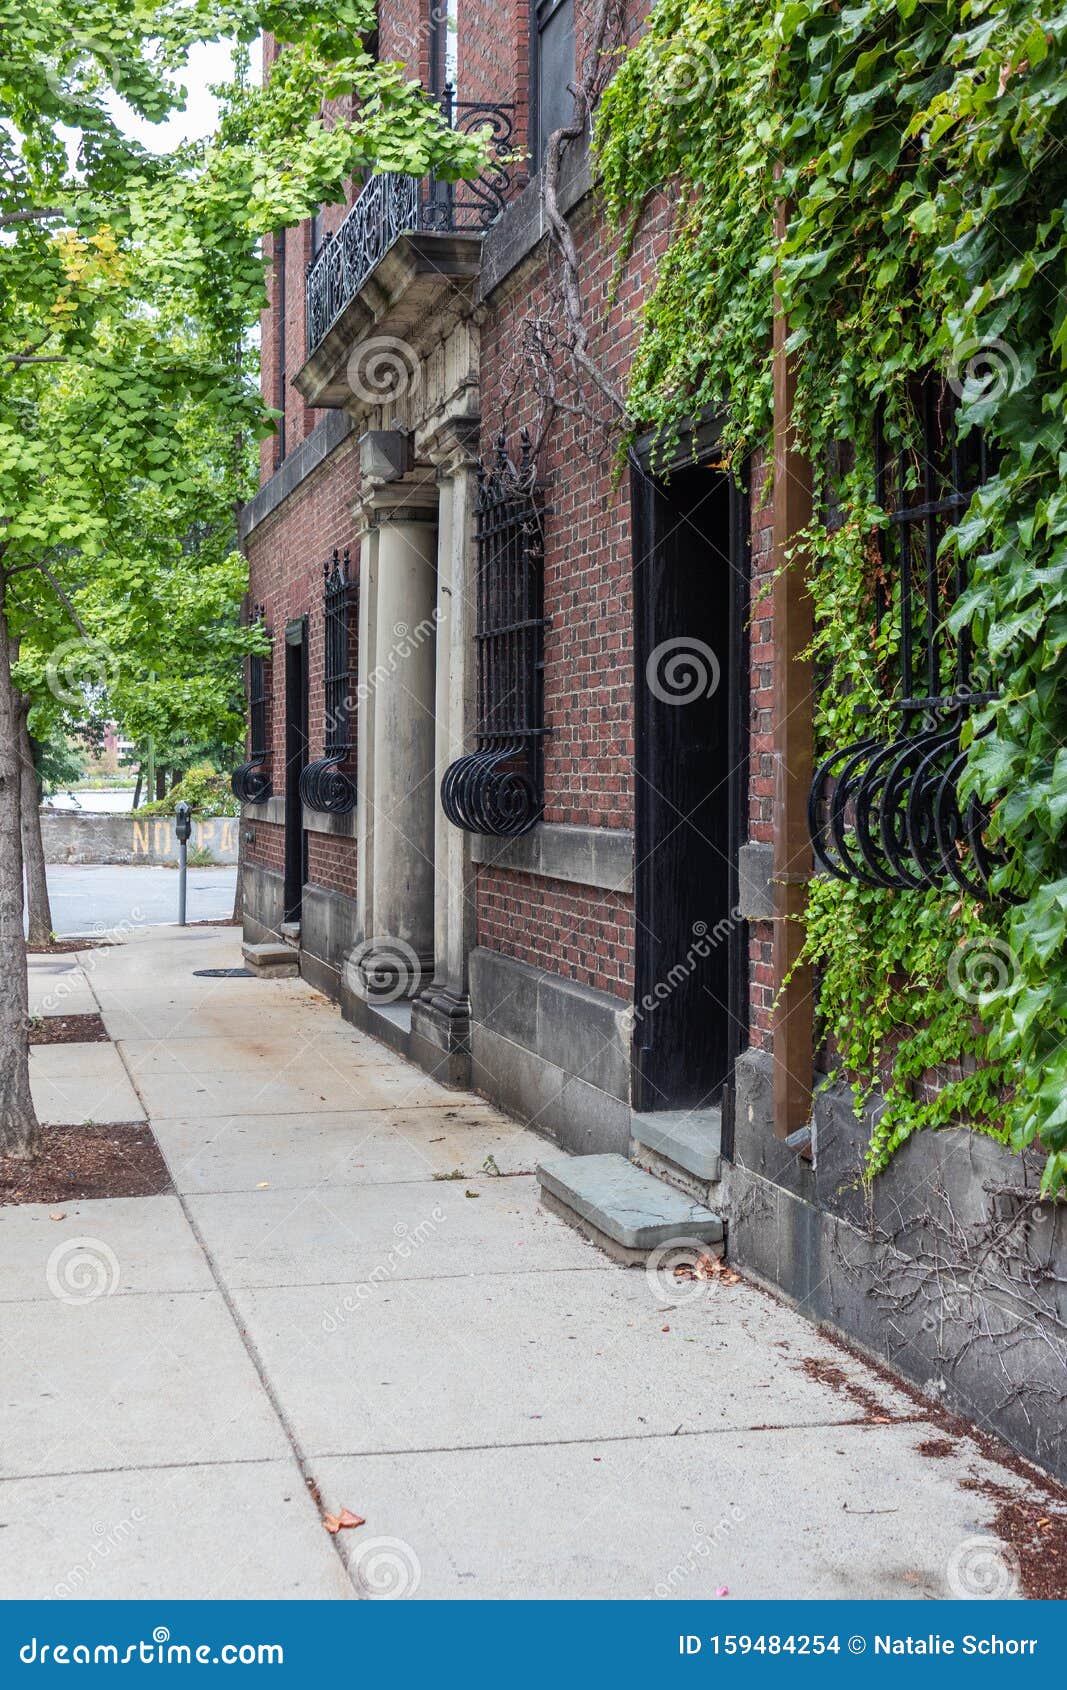 Sidewalk Alongside Residential Building With Bowed Wrought Iron